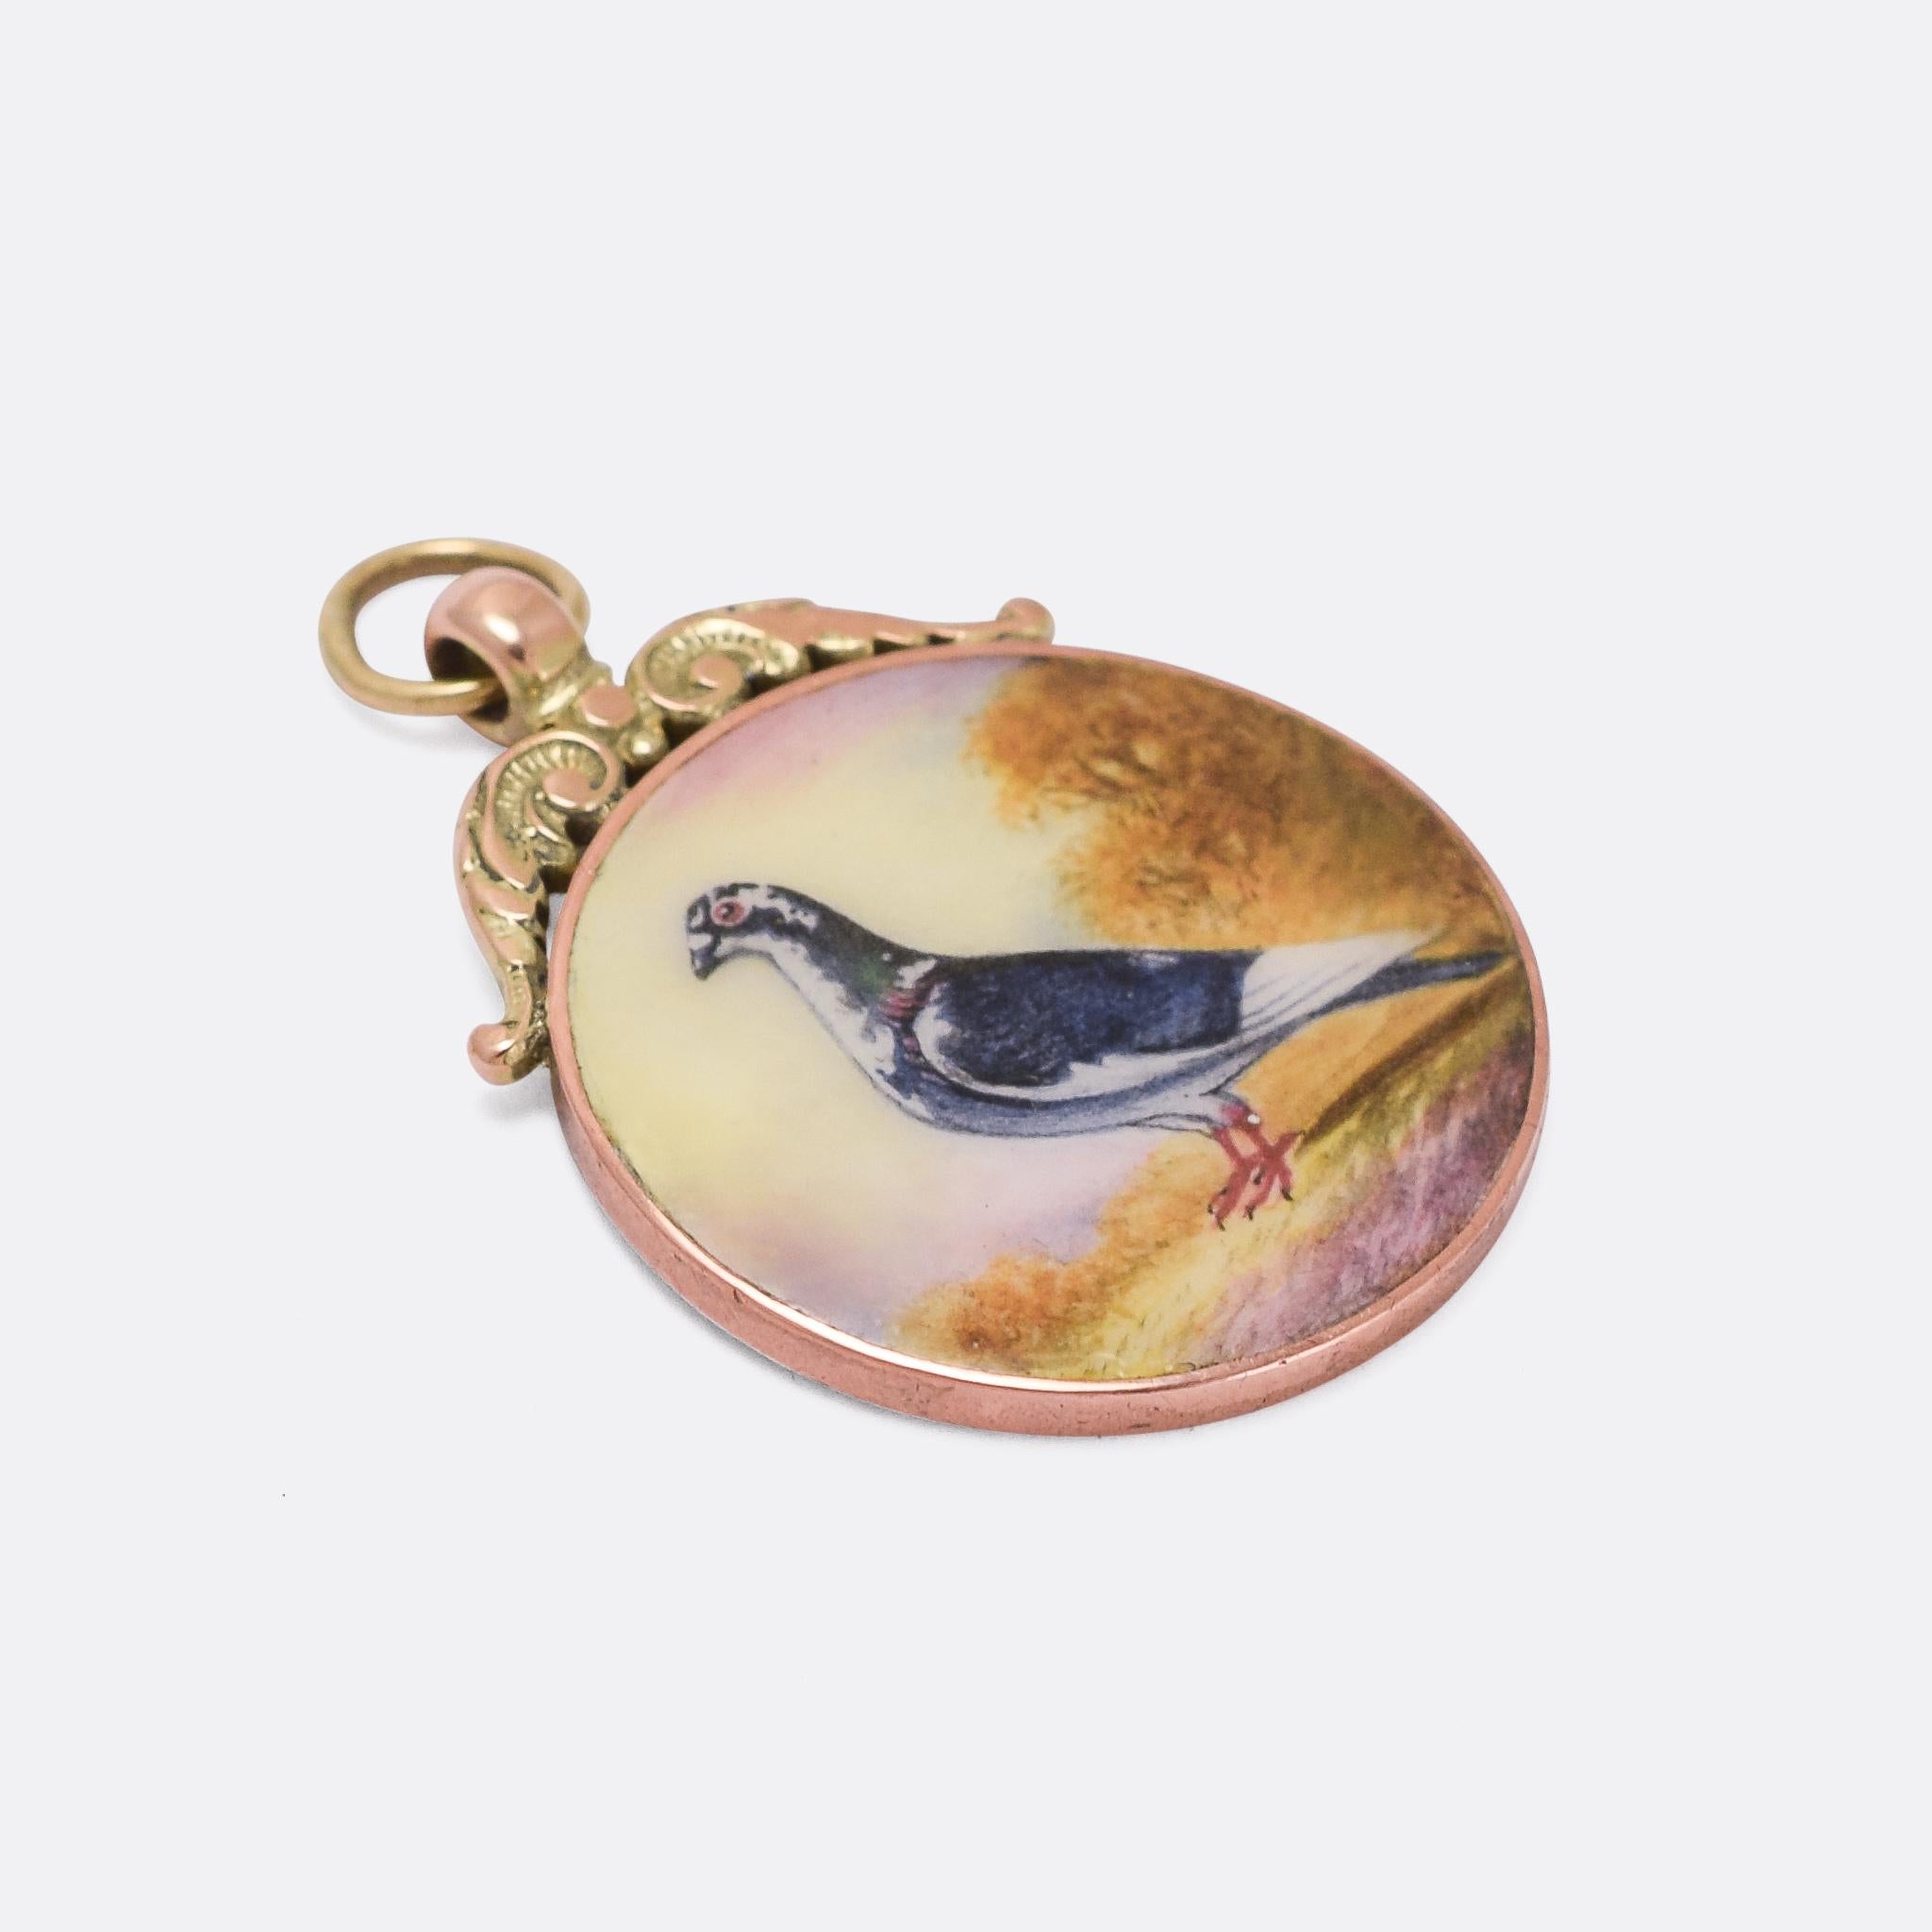 A weird and wonderful antique medal/pendant dating from the 1920s. The front features an enamel portrait of a fine racing pigeon, with engraving to the back that reads: “B.S.D.F.C. M Bourn CM” which relates to the Birmingham South District Flying